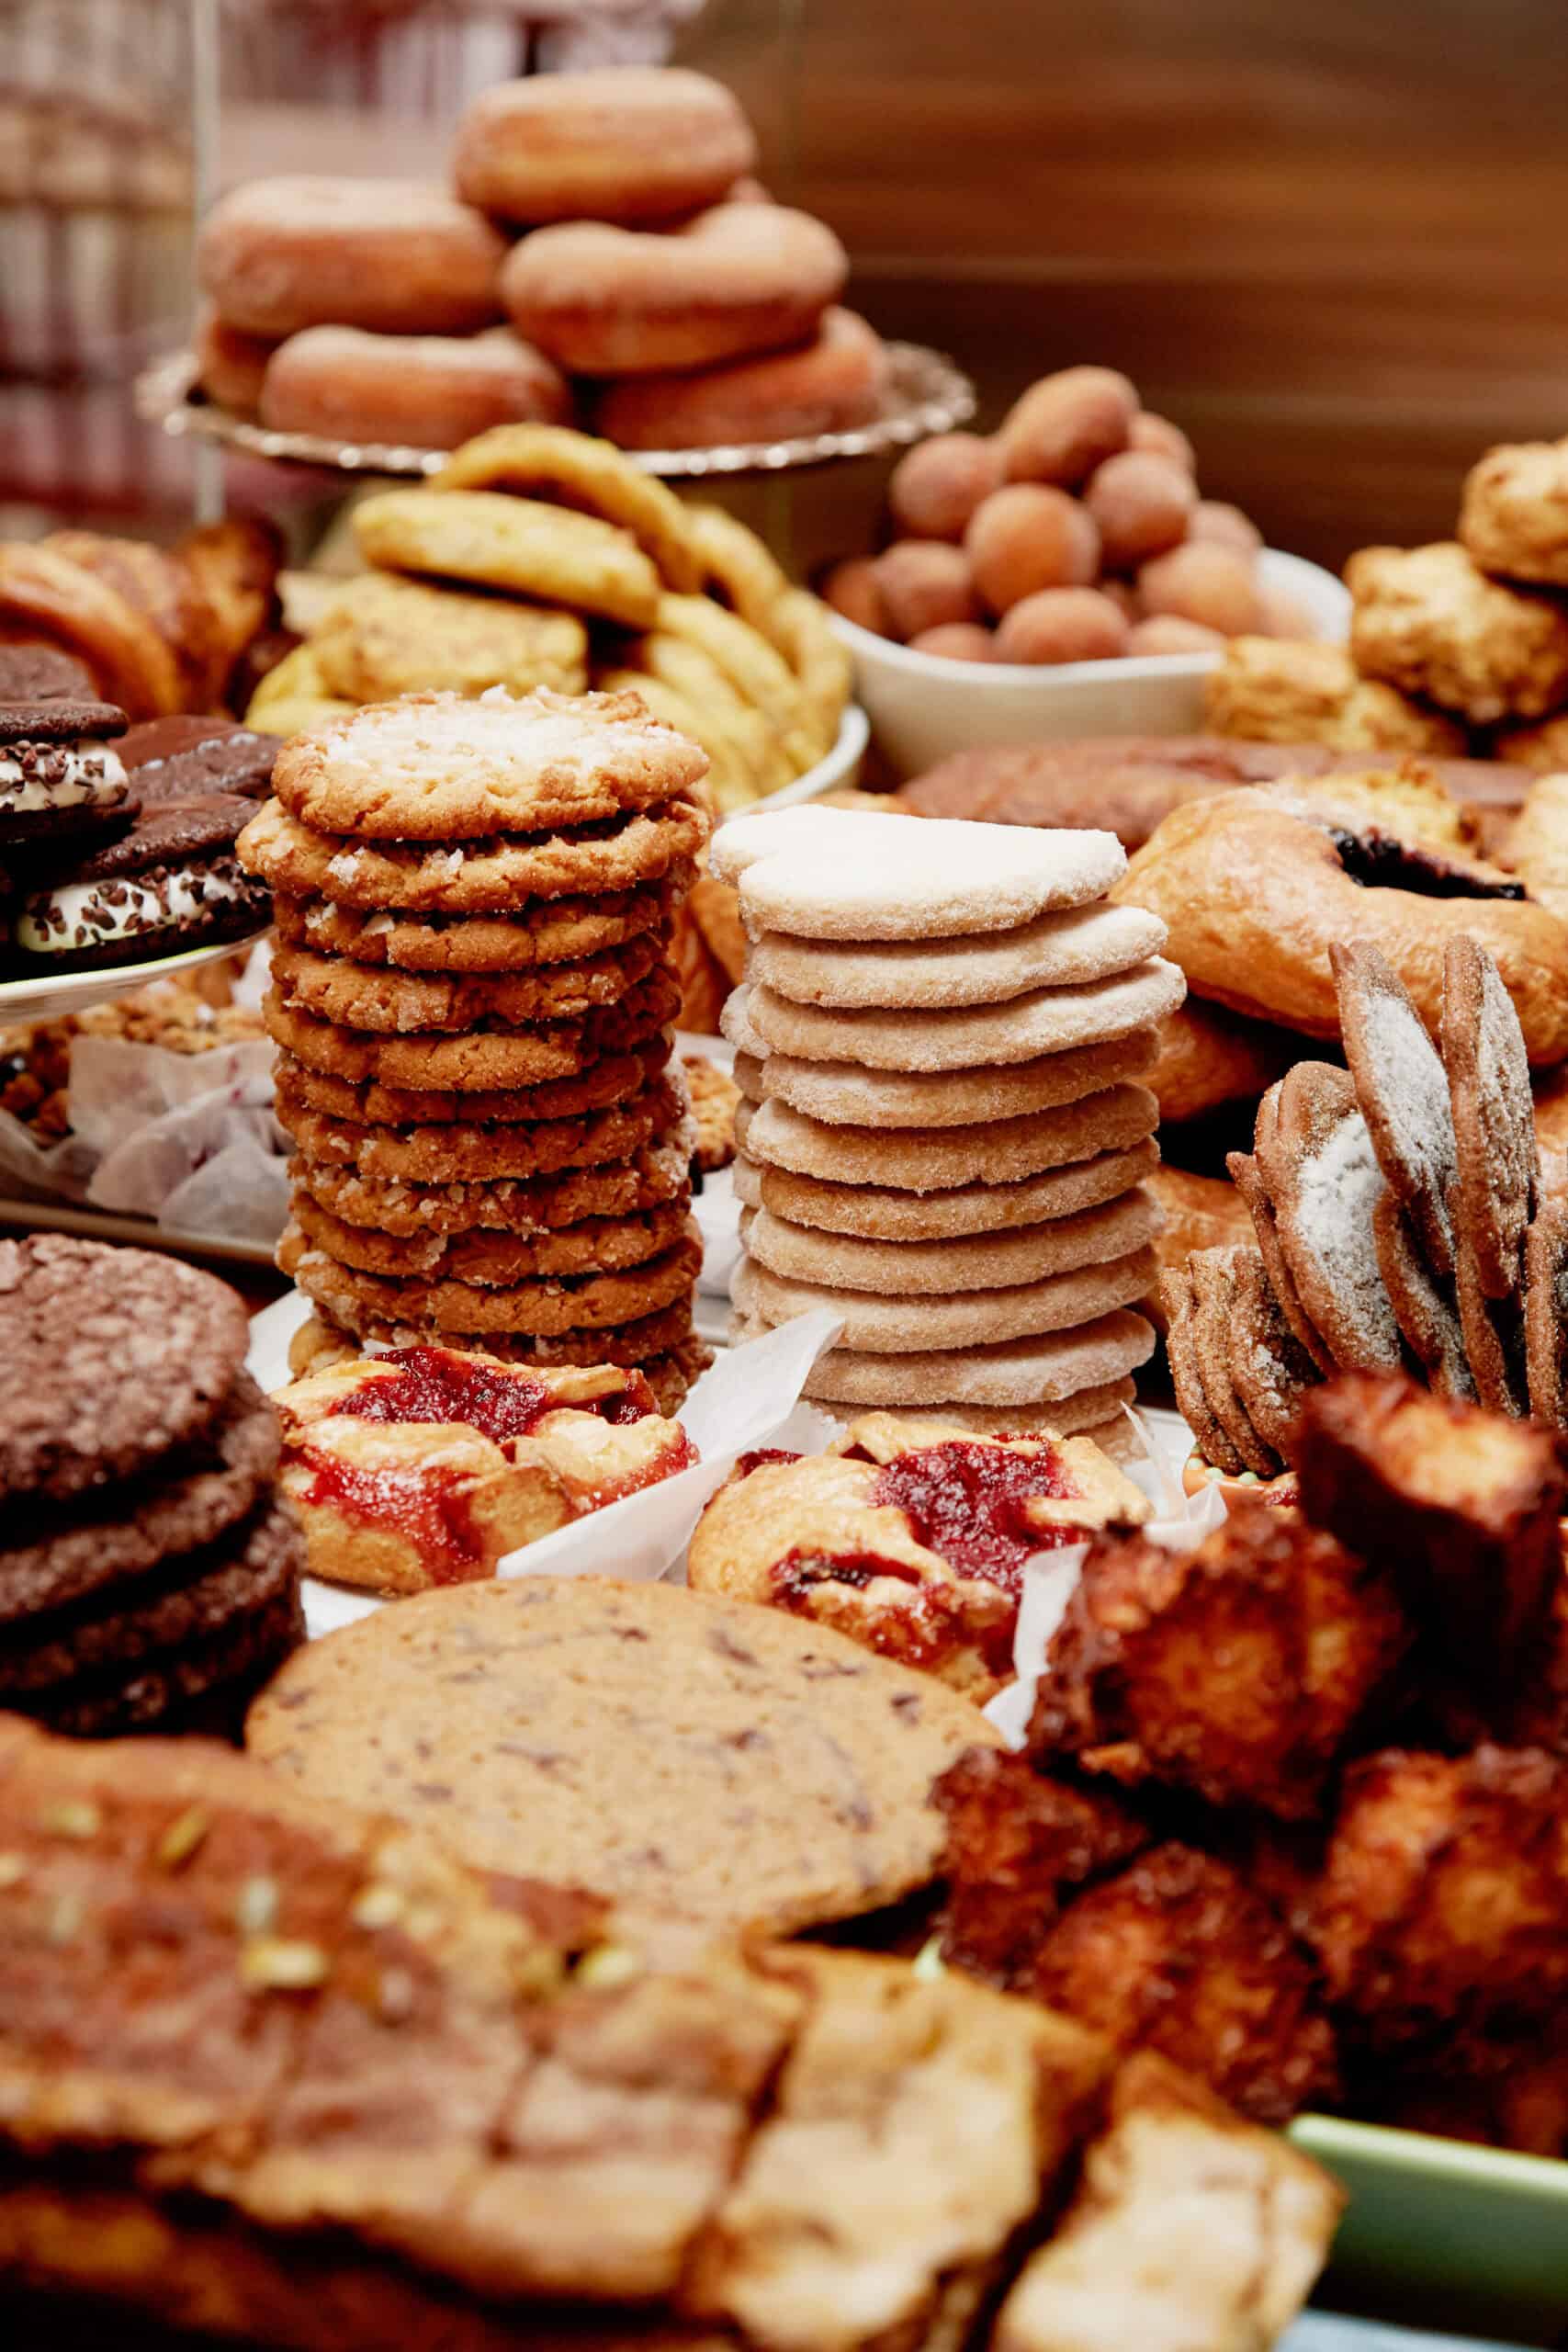 our pastry case filled with stacks of cookies, donuts, a variety of breads and pastries